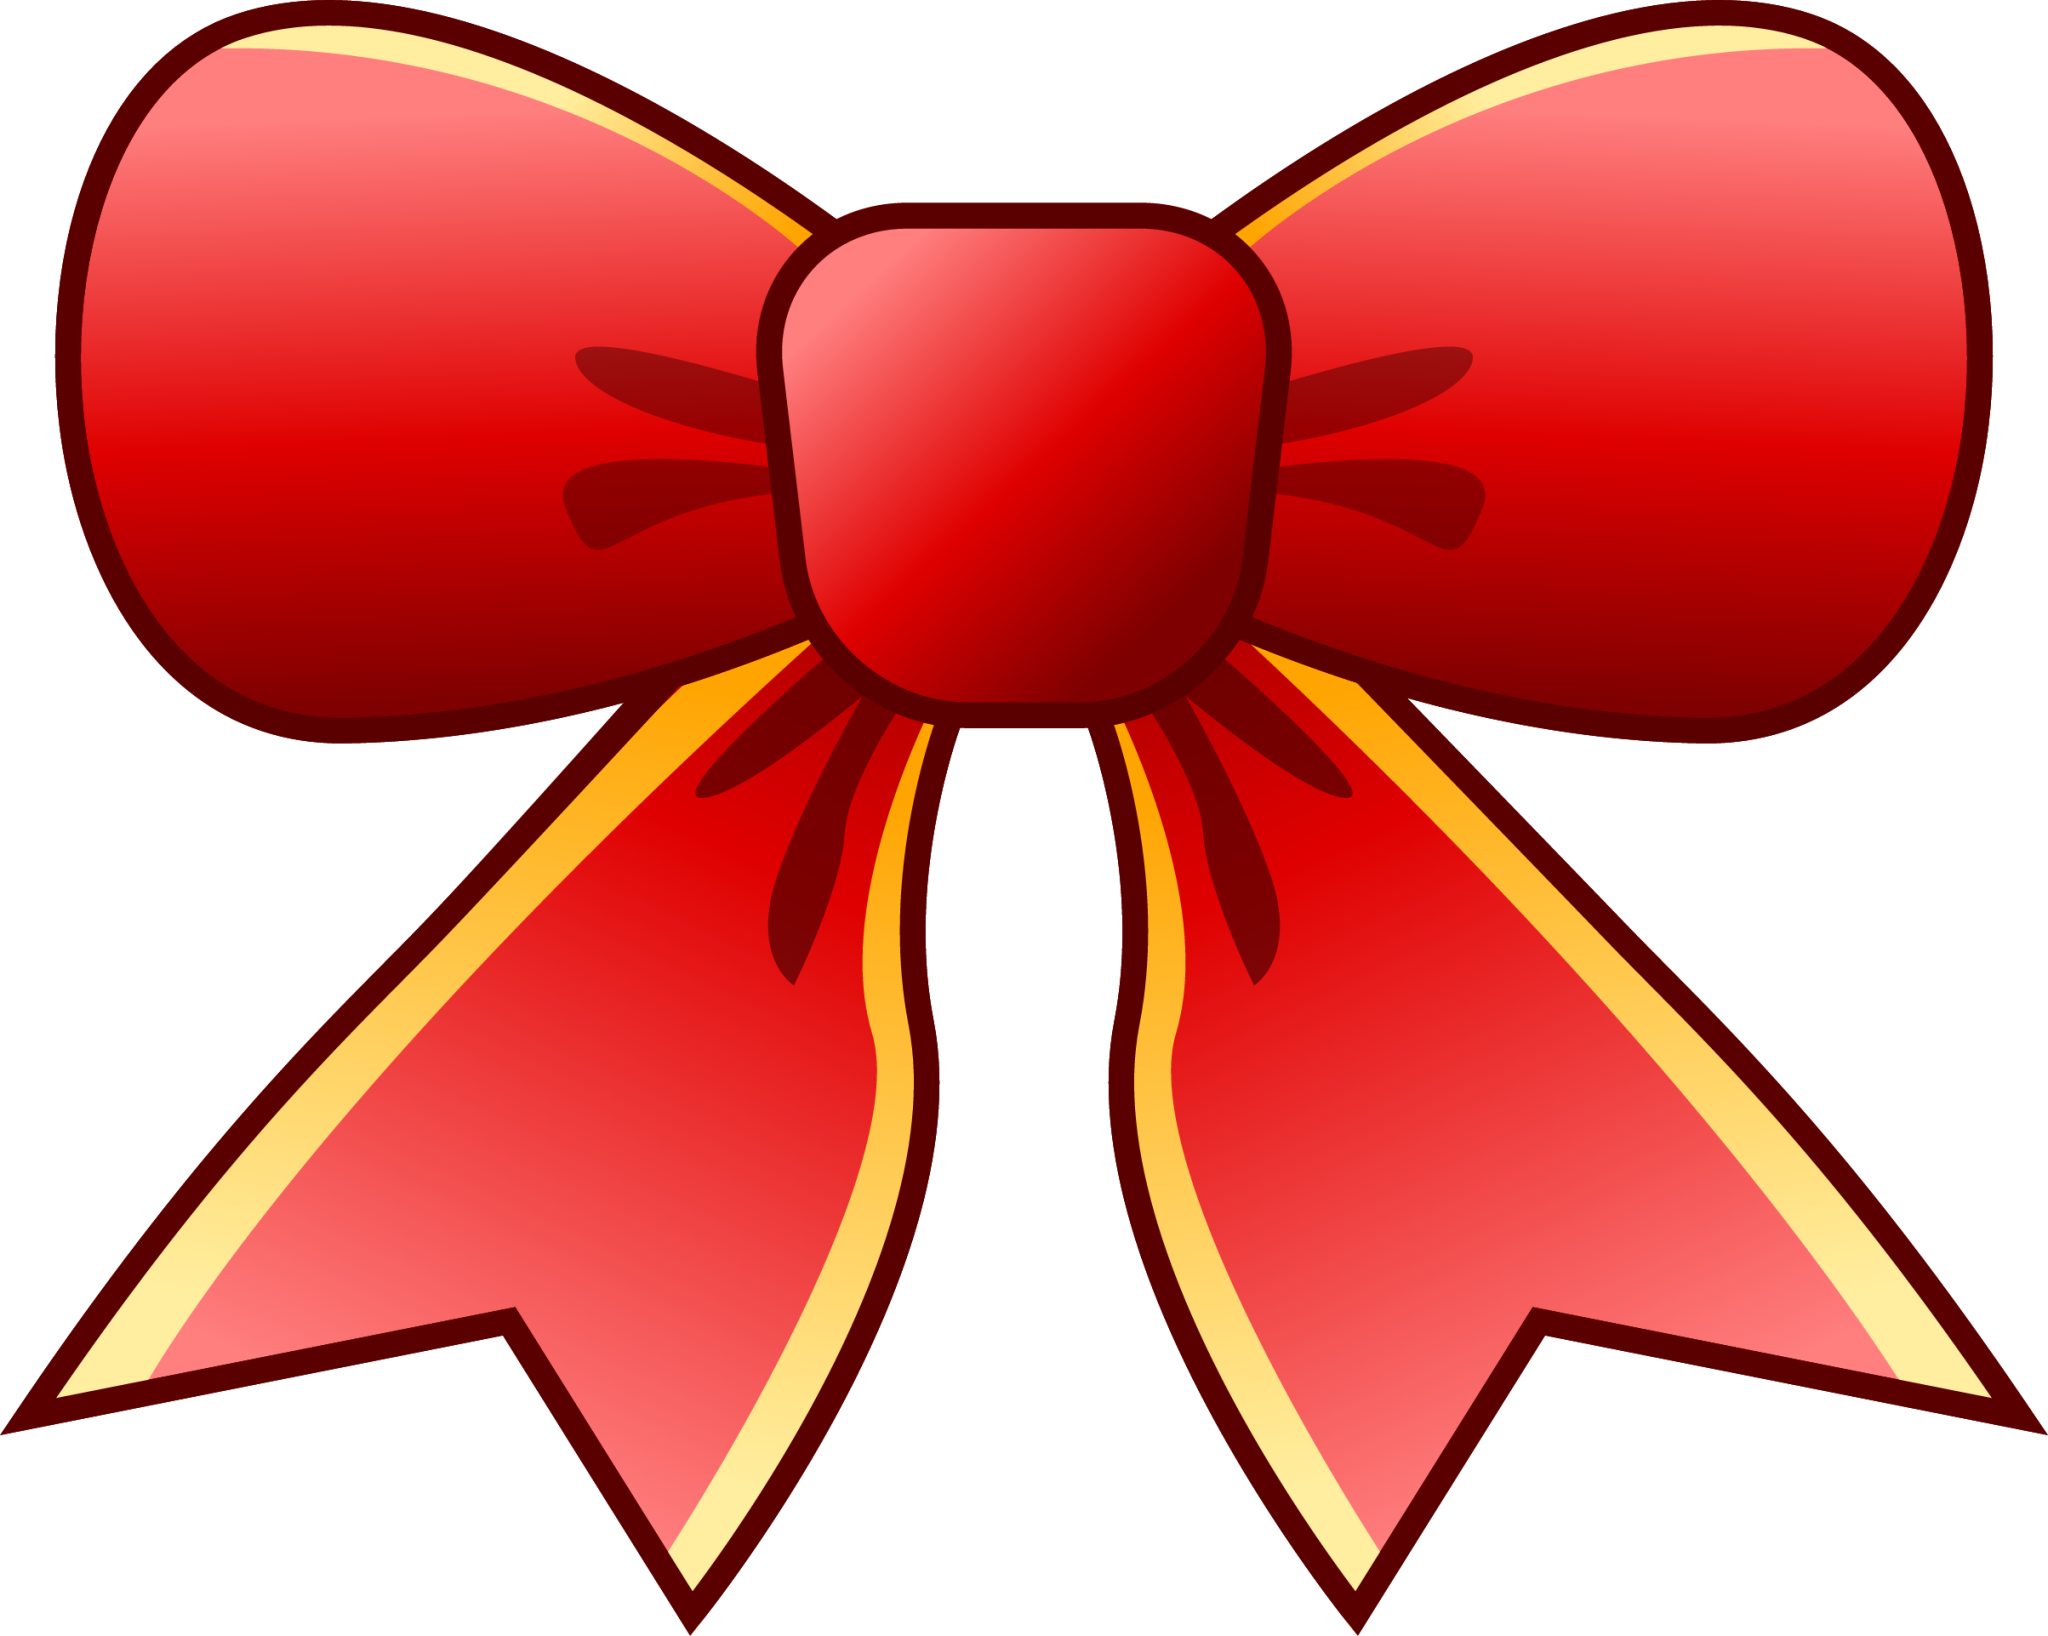 heart with ribbon Emoji - Download for free – Iconduck